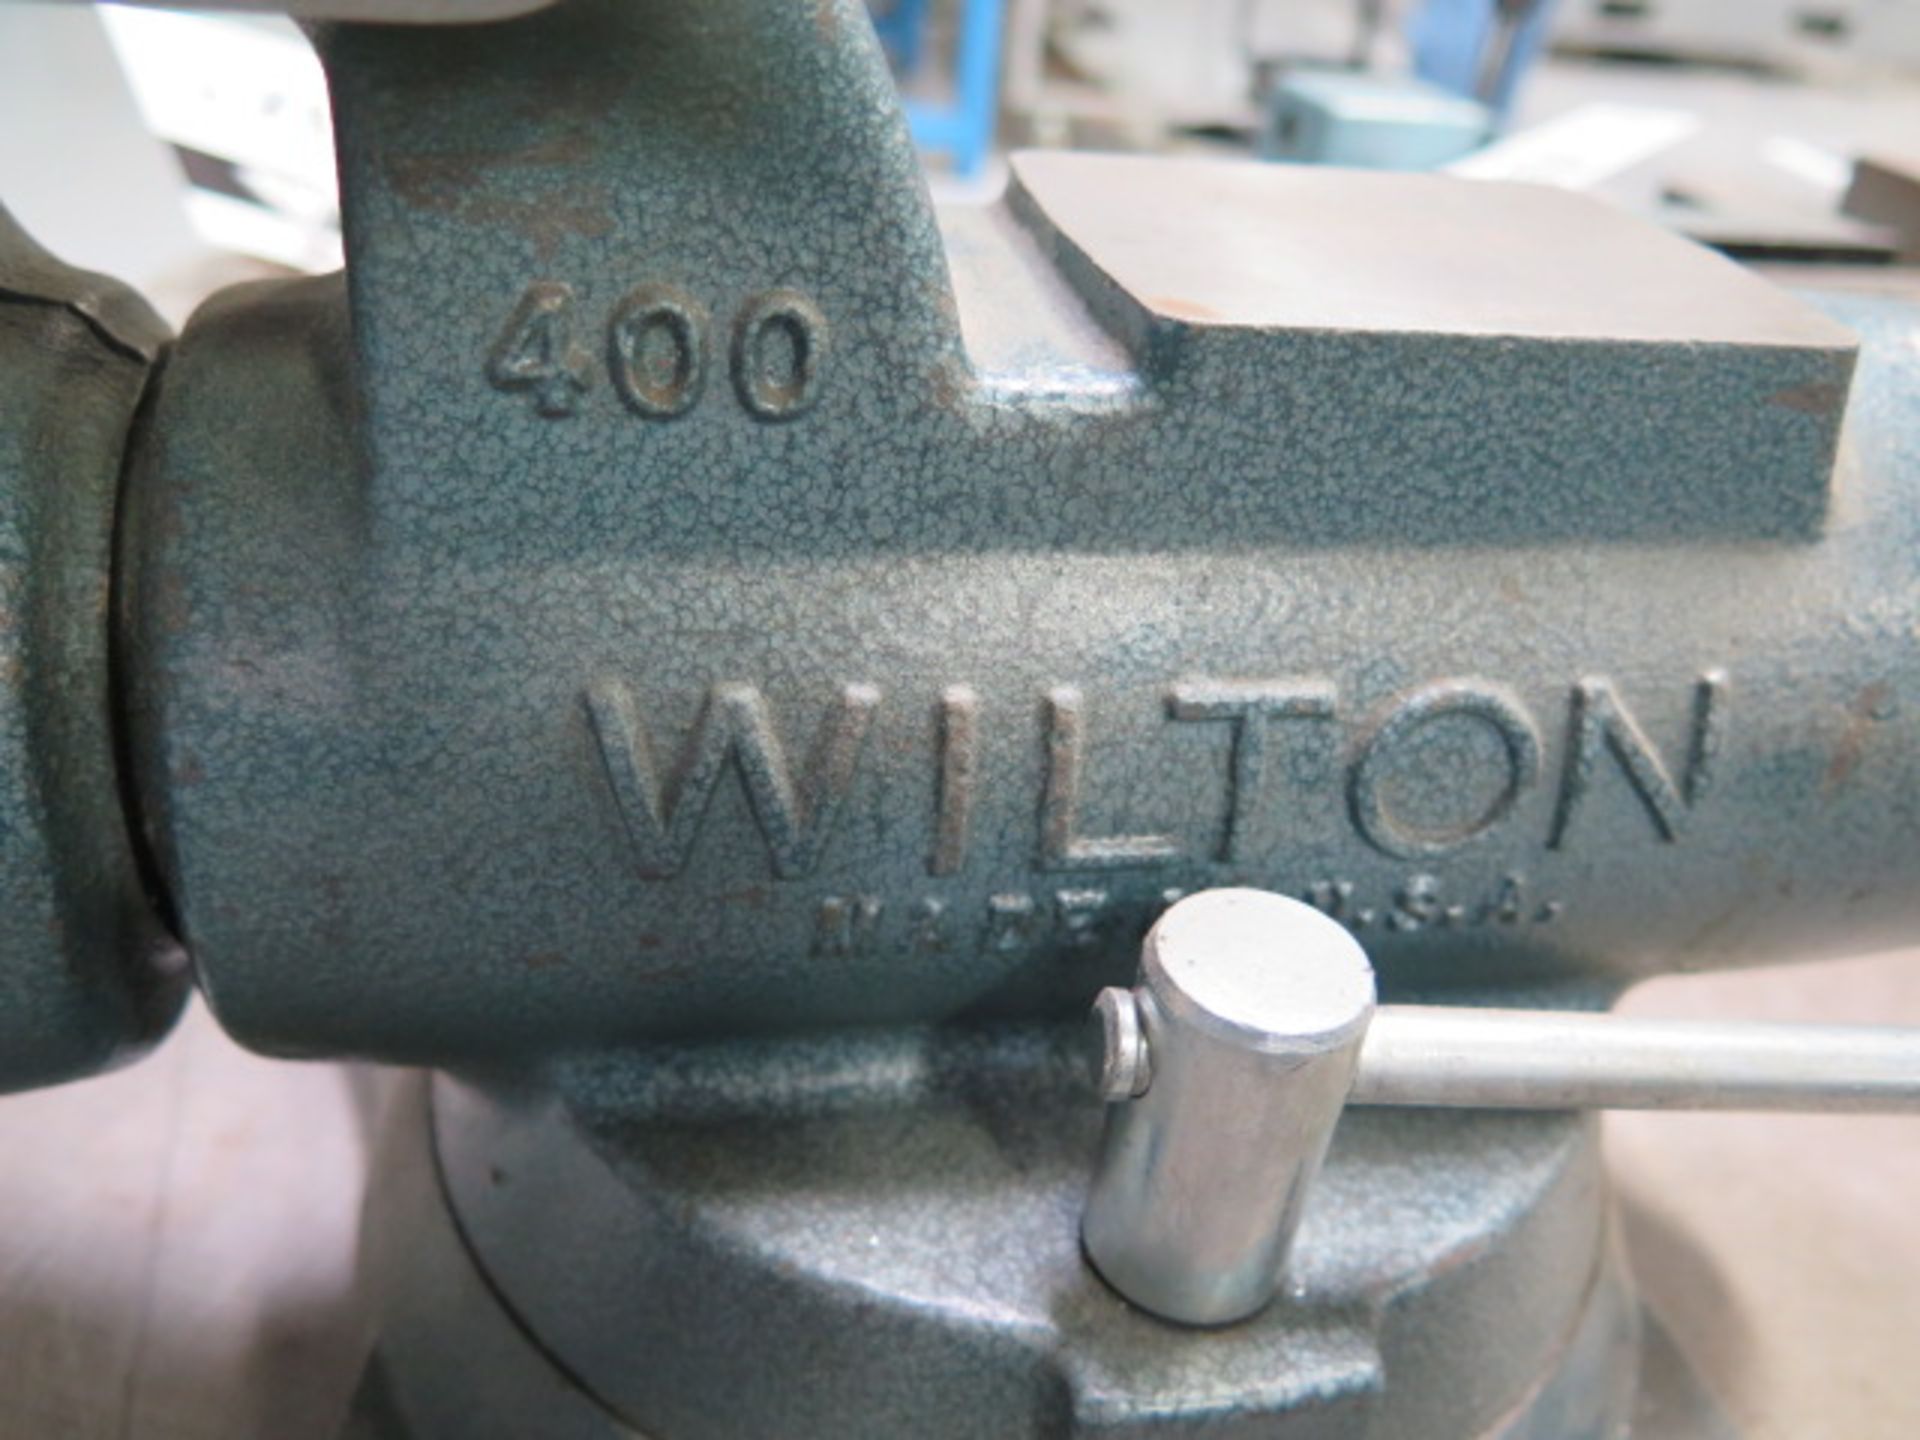 Wilton mdl. 400 4" Bench Vise (SOLD AS-IS - NO WARRANTY) - Image 5 of 6